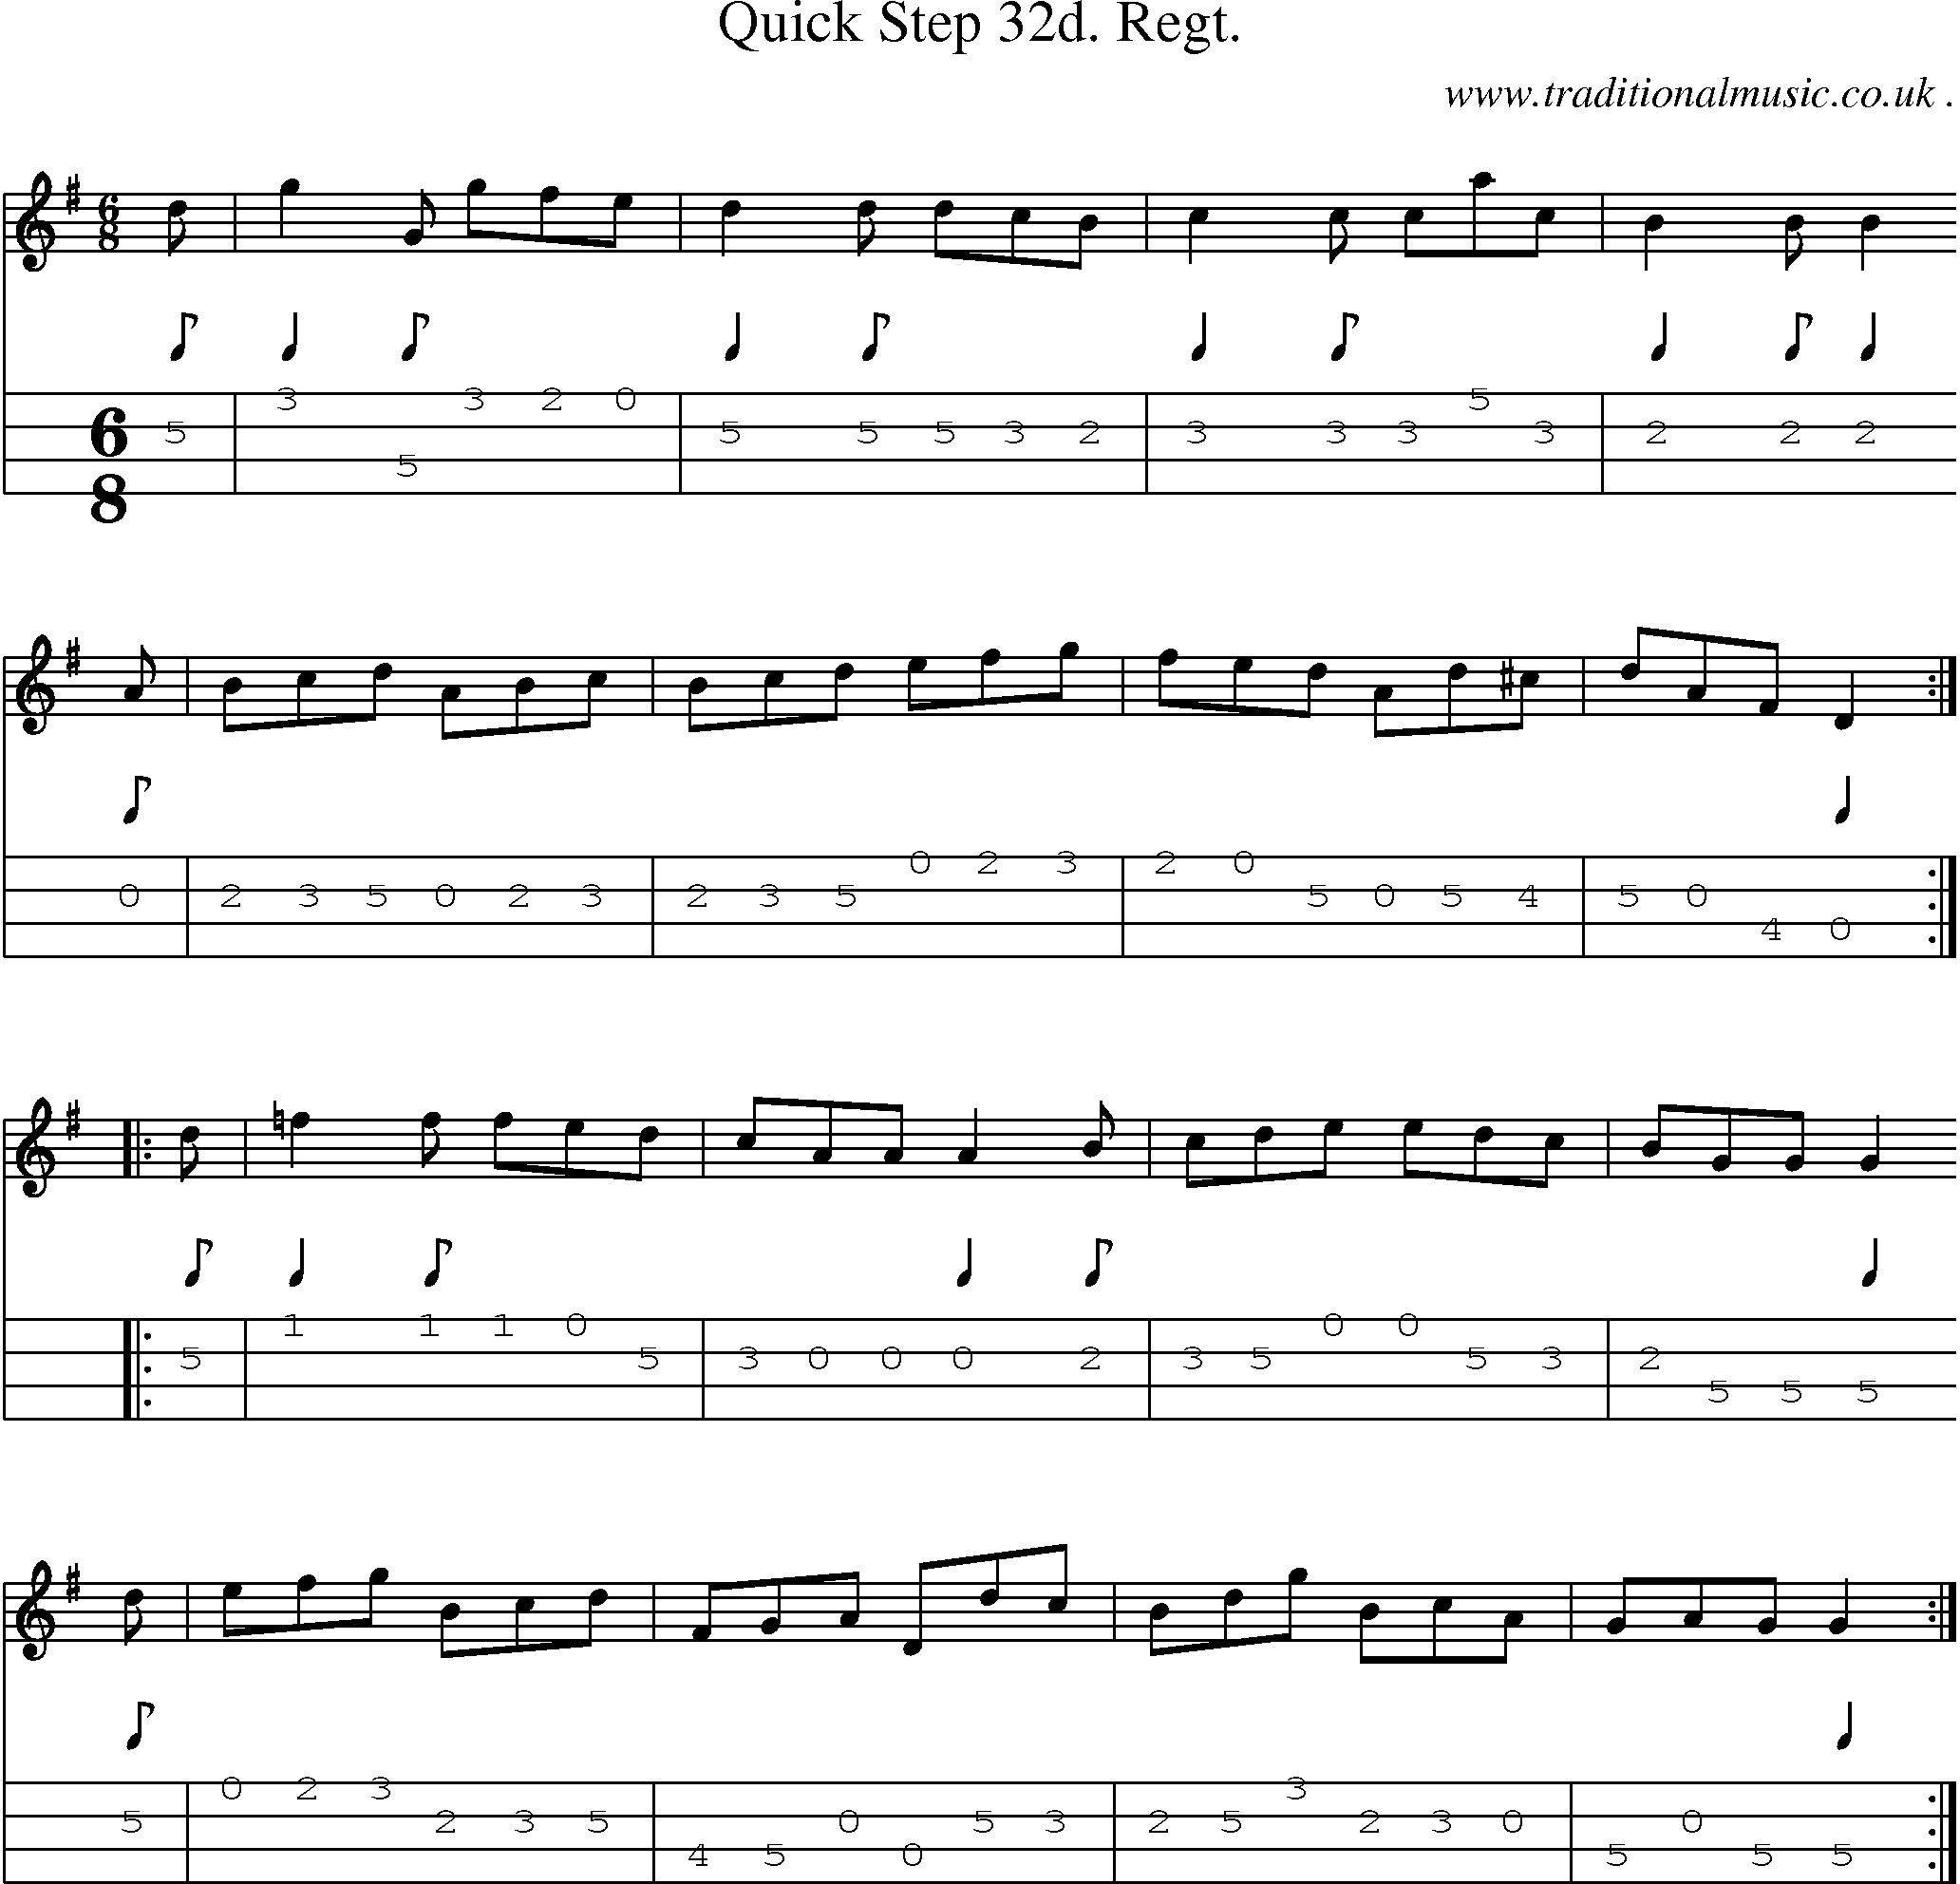 Sheet-music  score, Chords and Mandolin Tabs for Quick Step 32d Regt